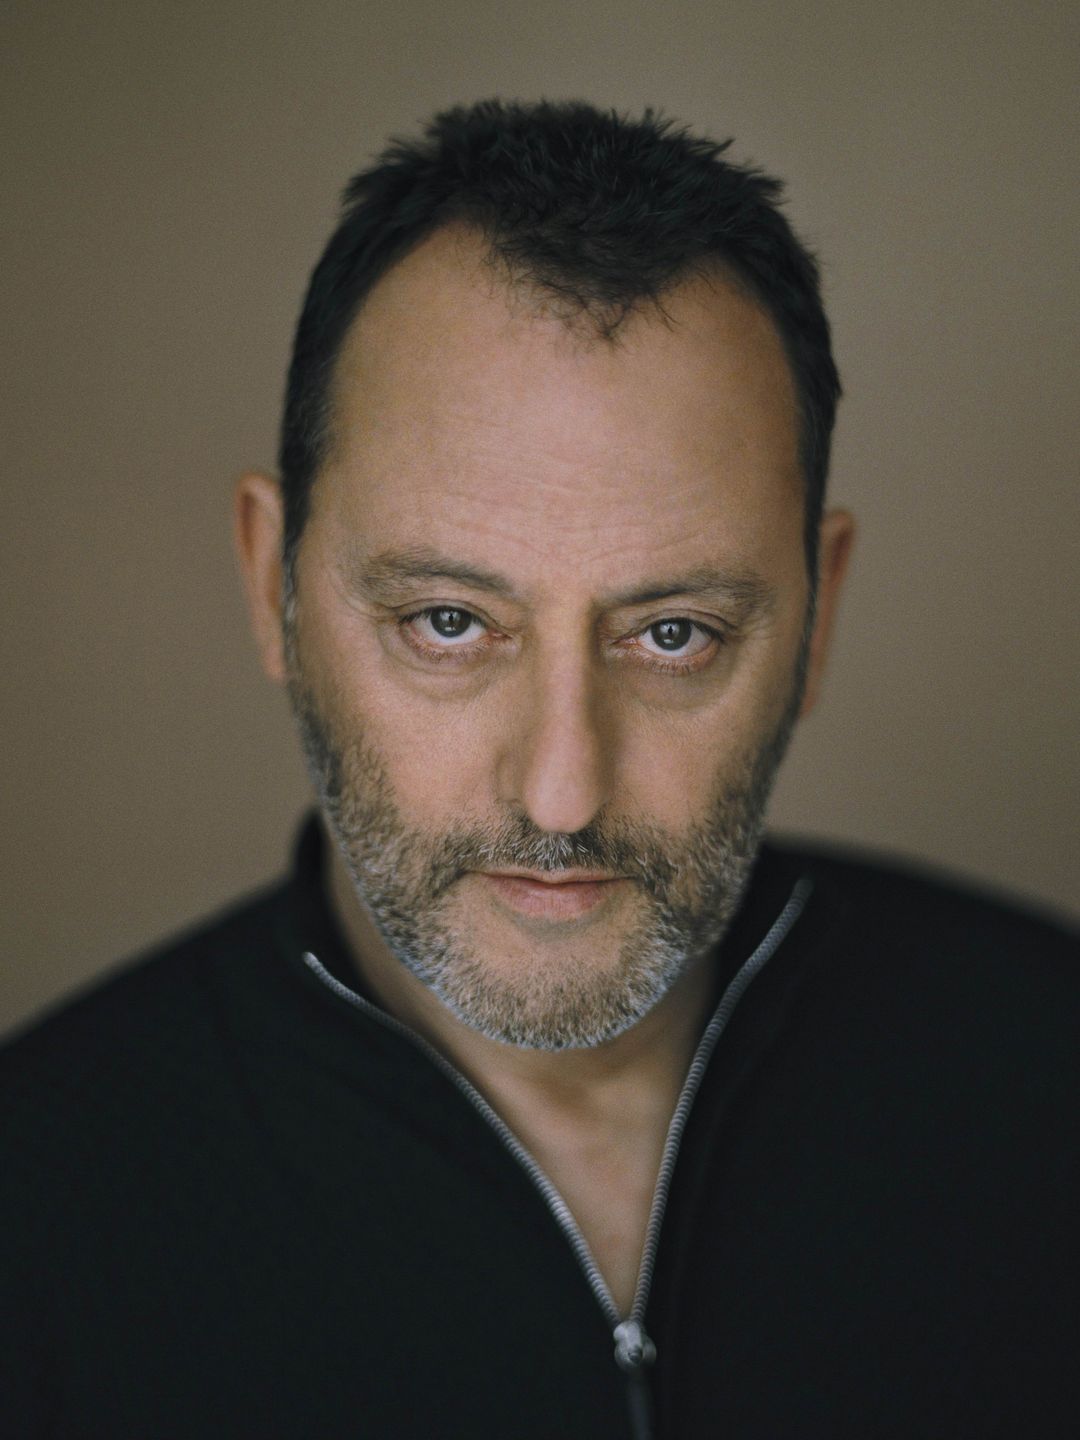 Jean Reno height and weight